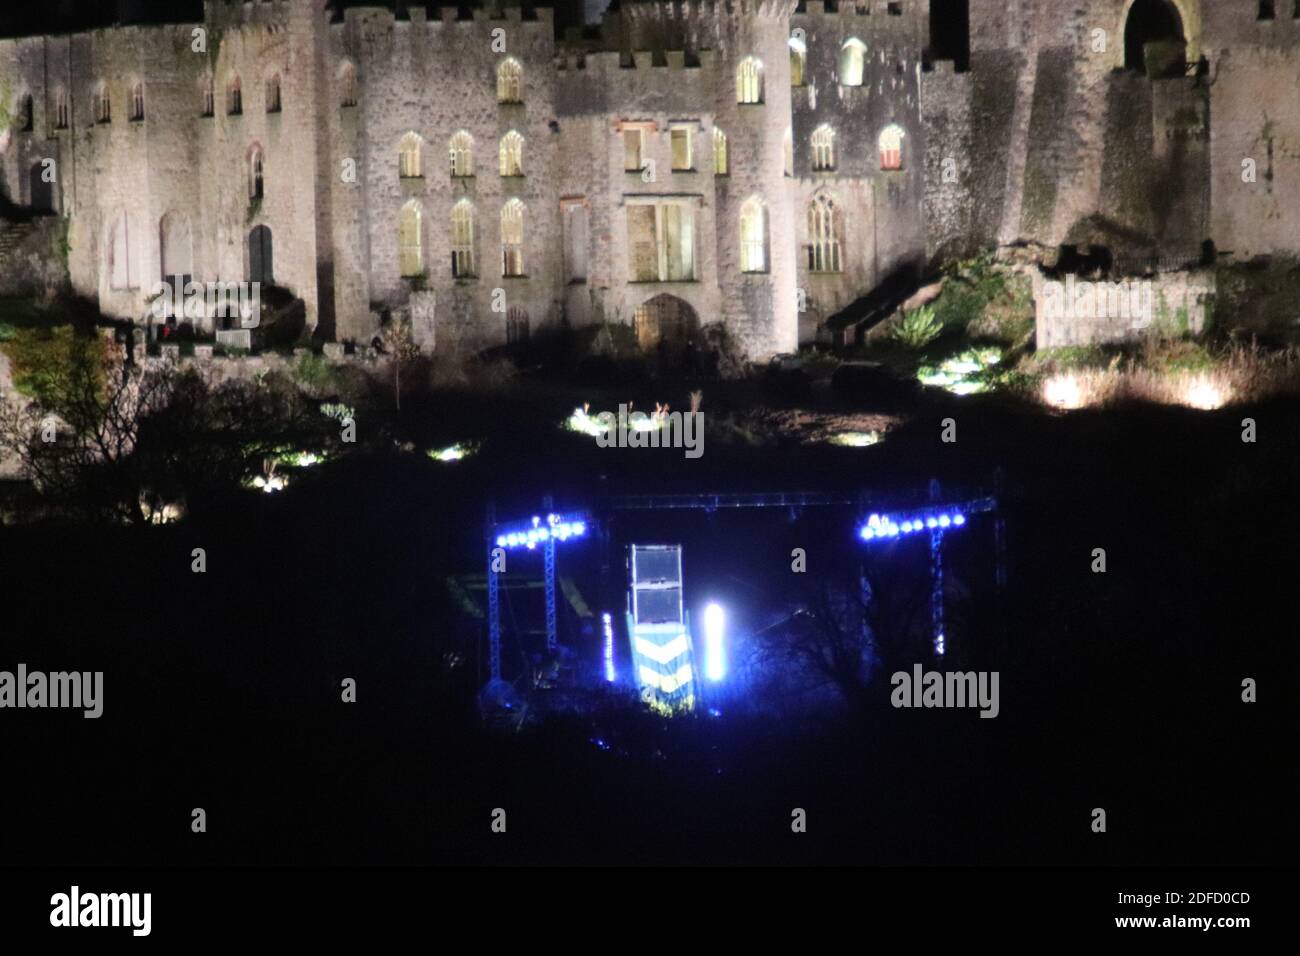 Gwrych Castle Abergele North Wales, I'm a celebrity get me out of here Gwrych castle lit up at night. In front of the castle is the cyclone trial also lit up. Credit: Mike Clarke/Alamy Live News Stock Photo